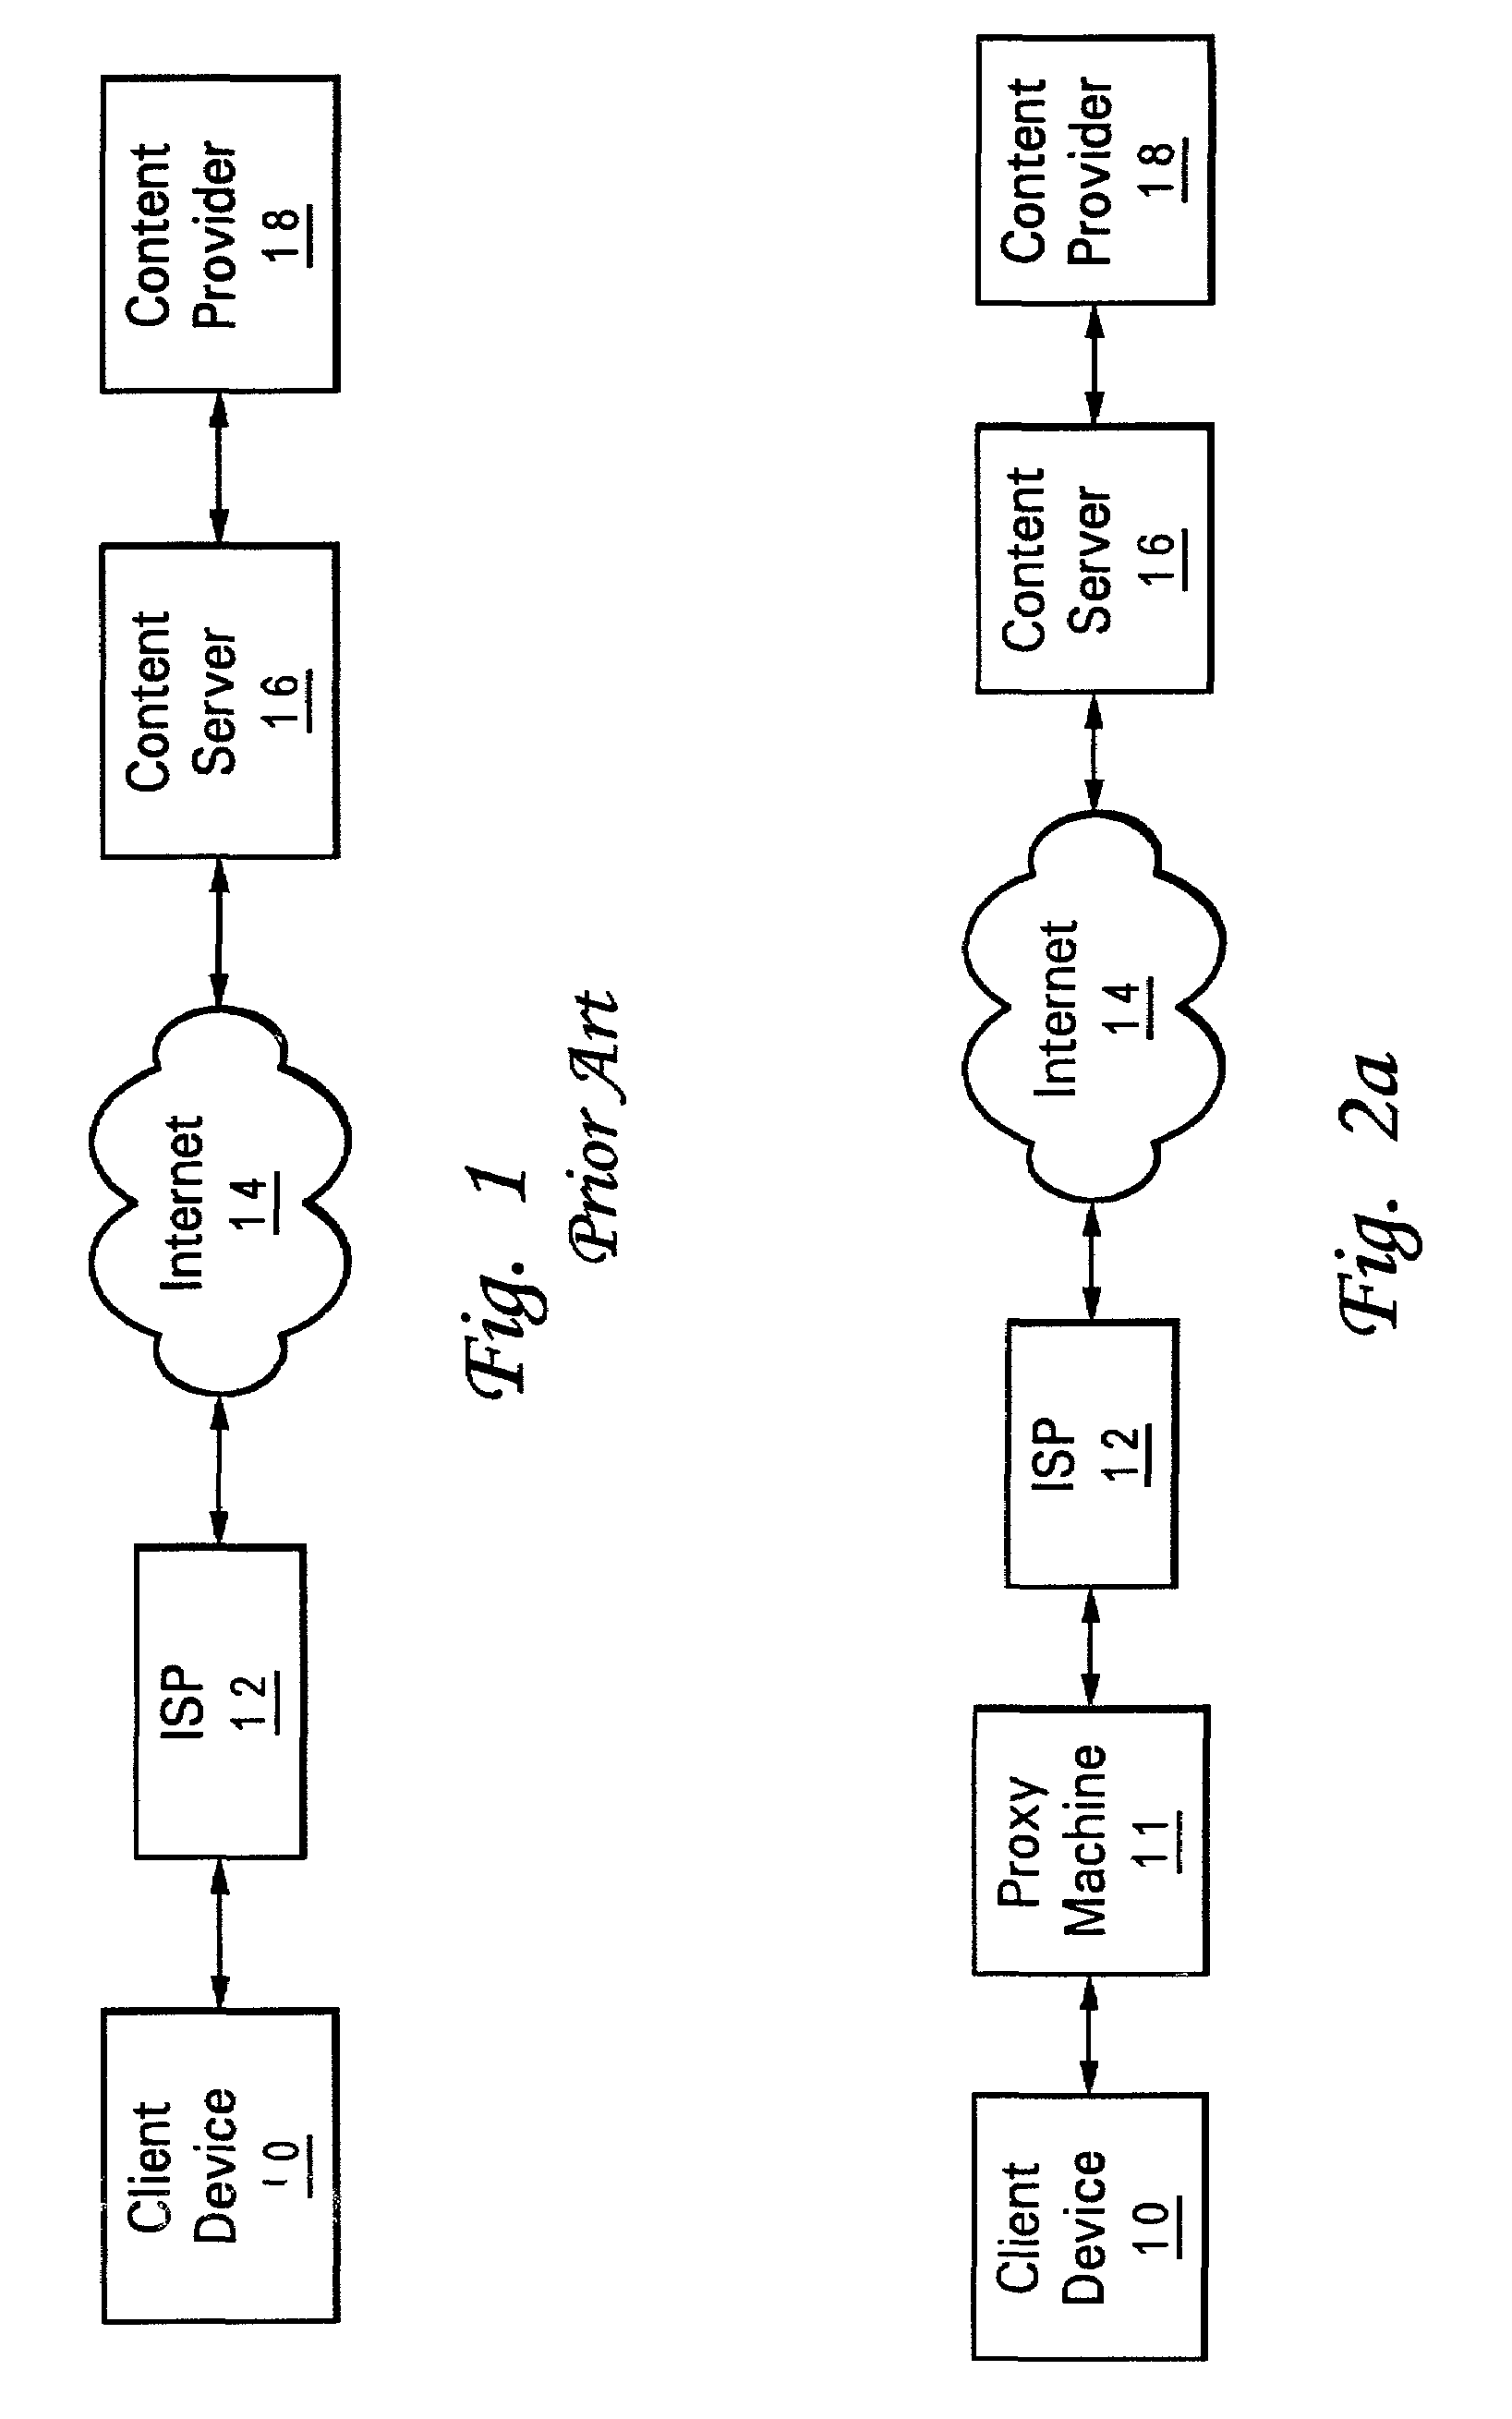 System and method for transcoding support of web content over secure connections